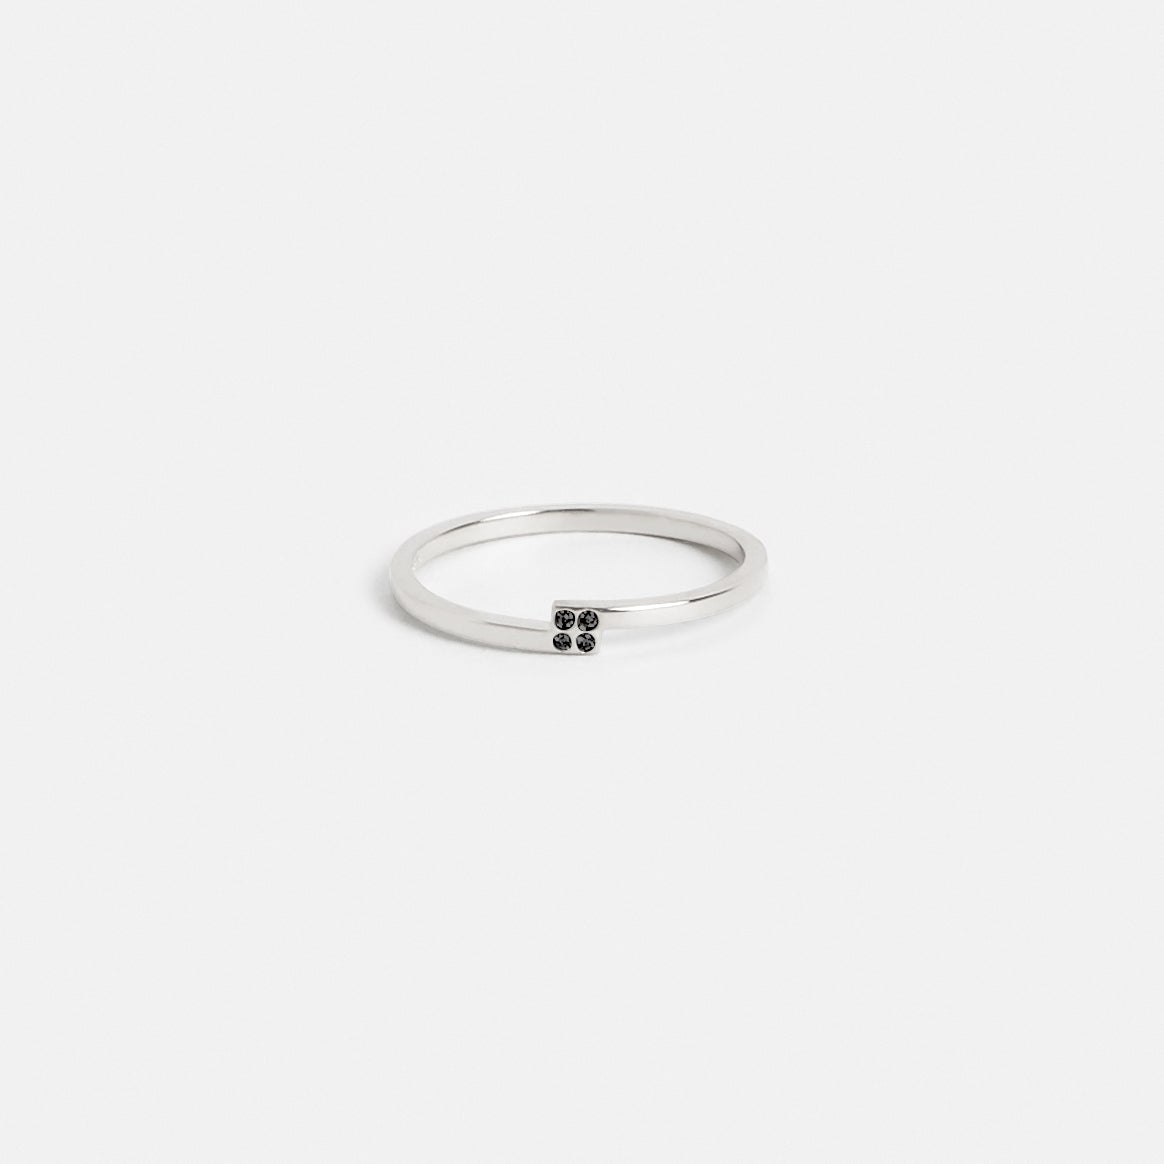 Piva Unique Ring in Sterling Silver set with Black Diamonds By SHW Fine Jewelry NYC